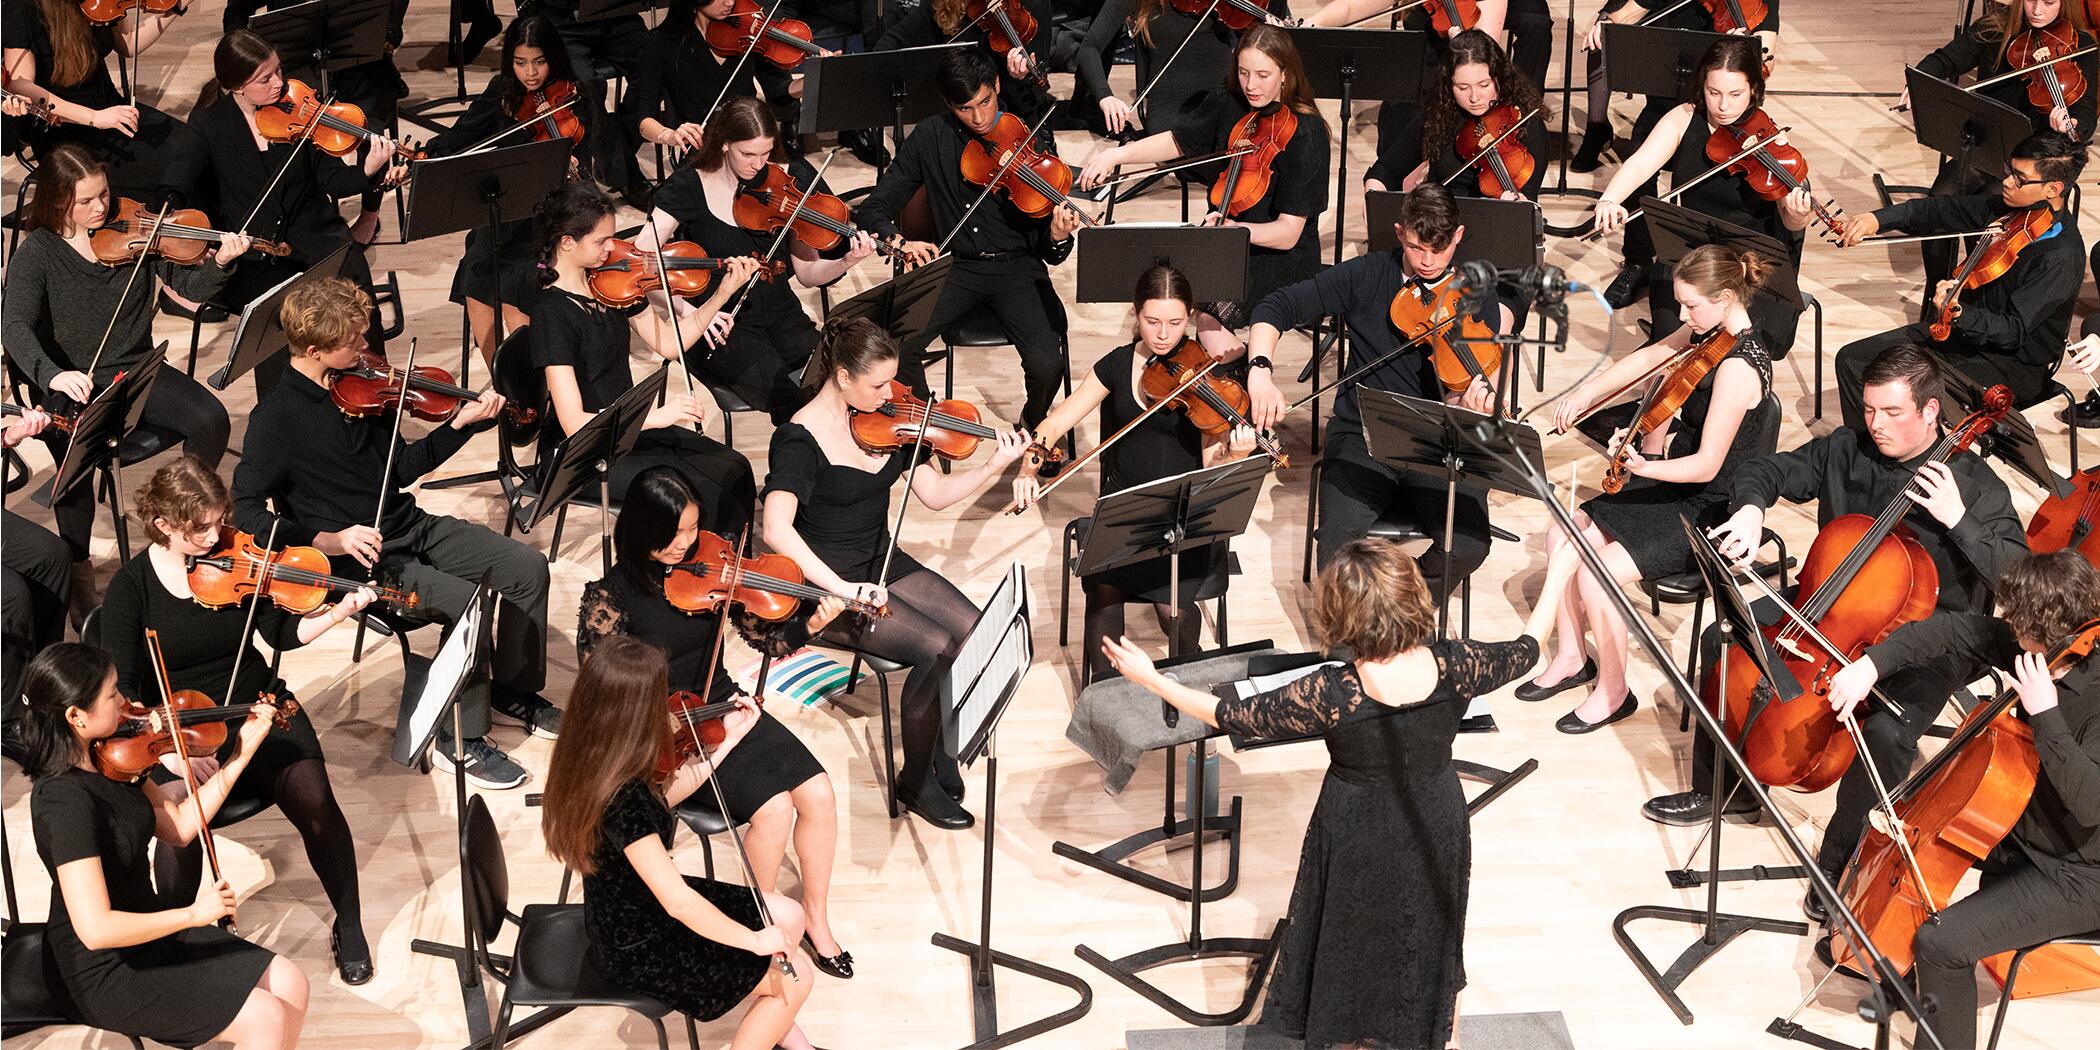 The ORHS String Orchestra during a performance.